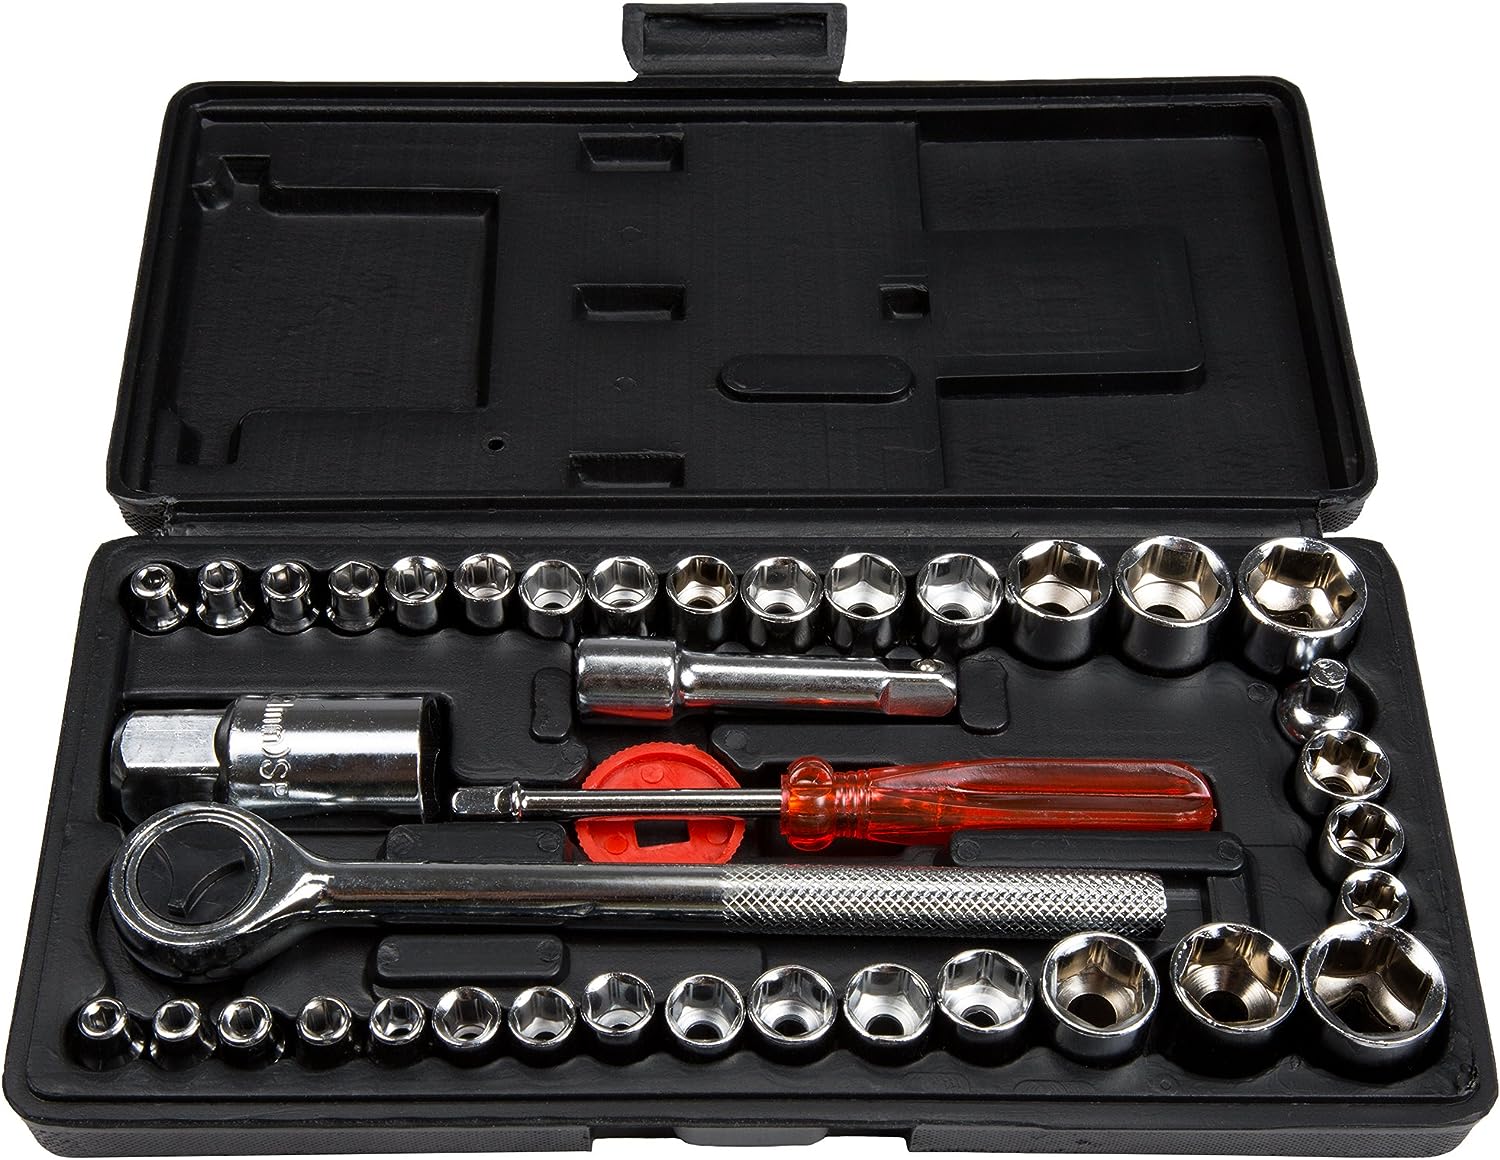 40 Piece Ratcheting Socket Wrench Set - Metric and [...]